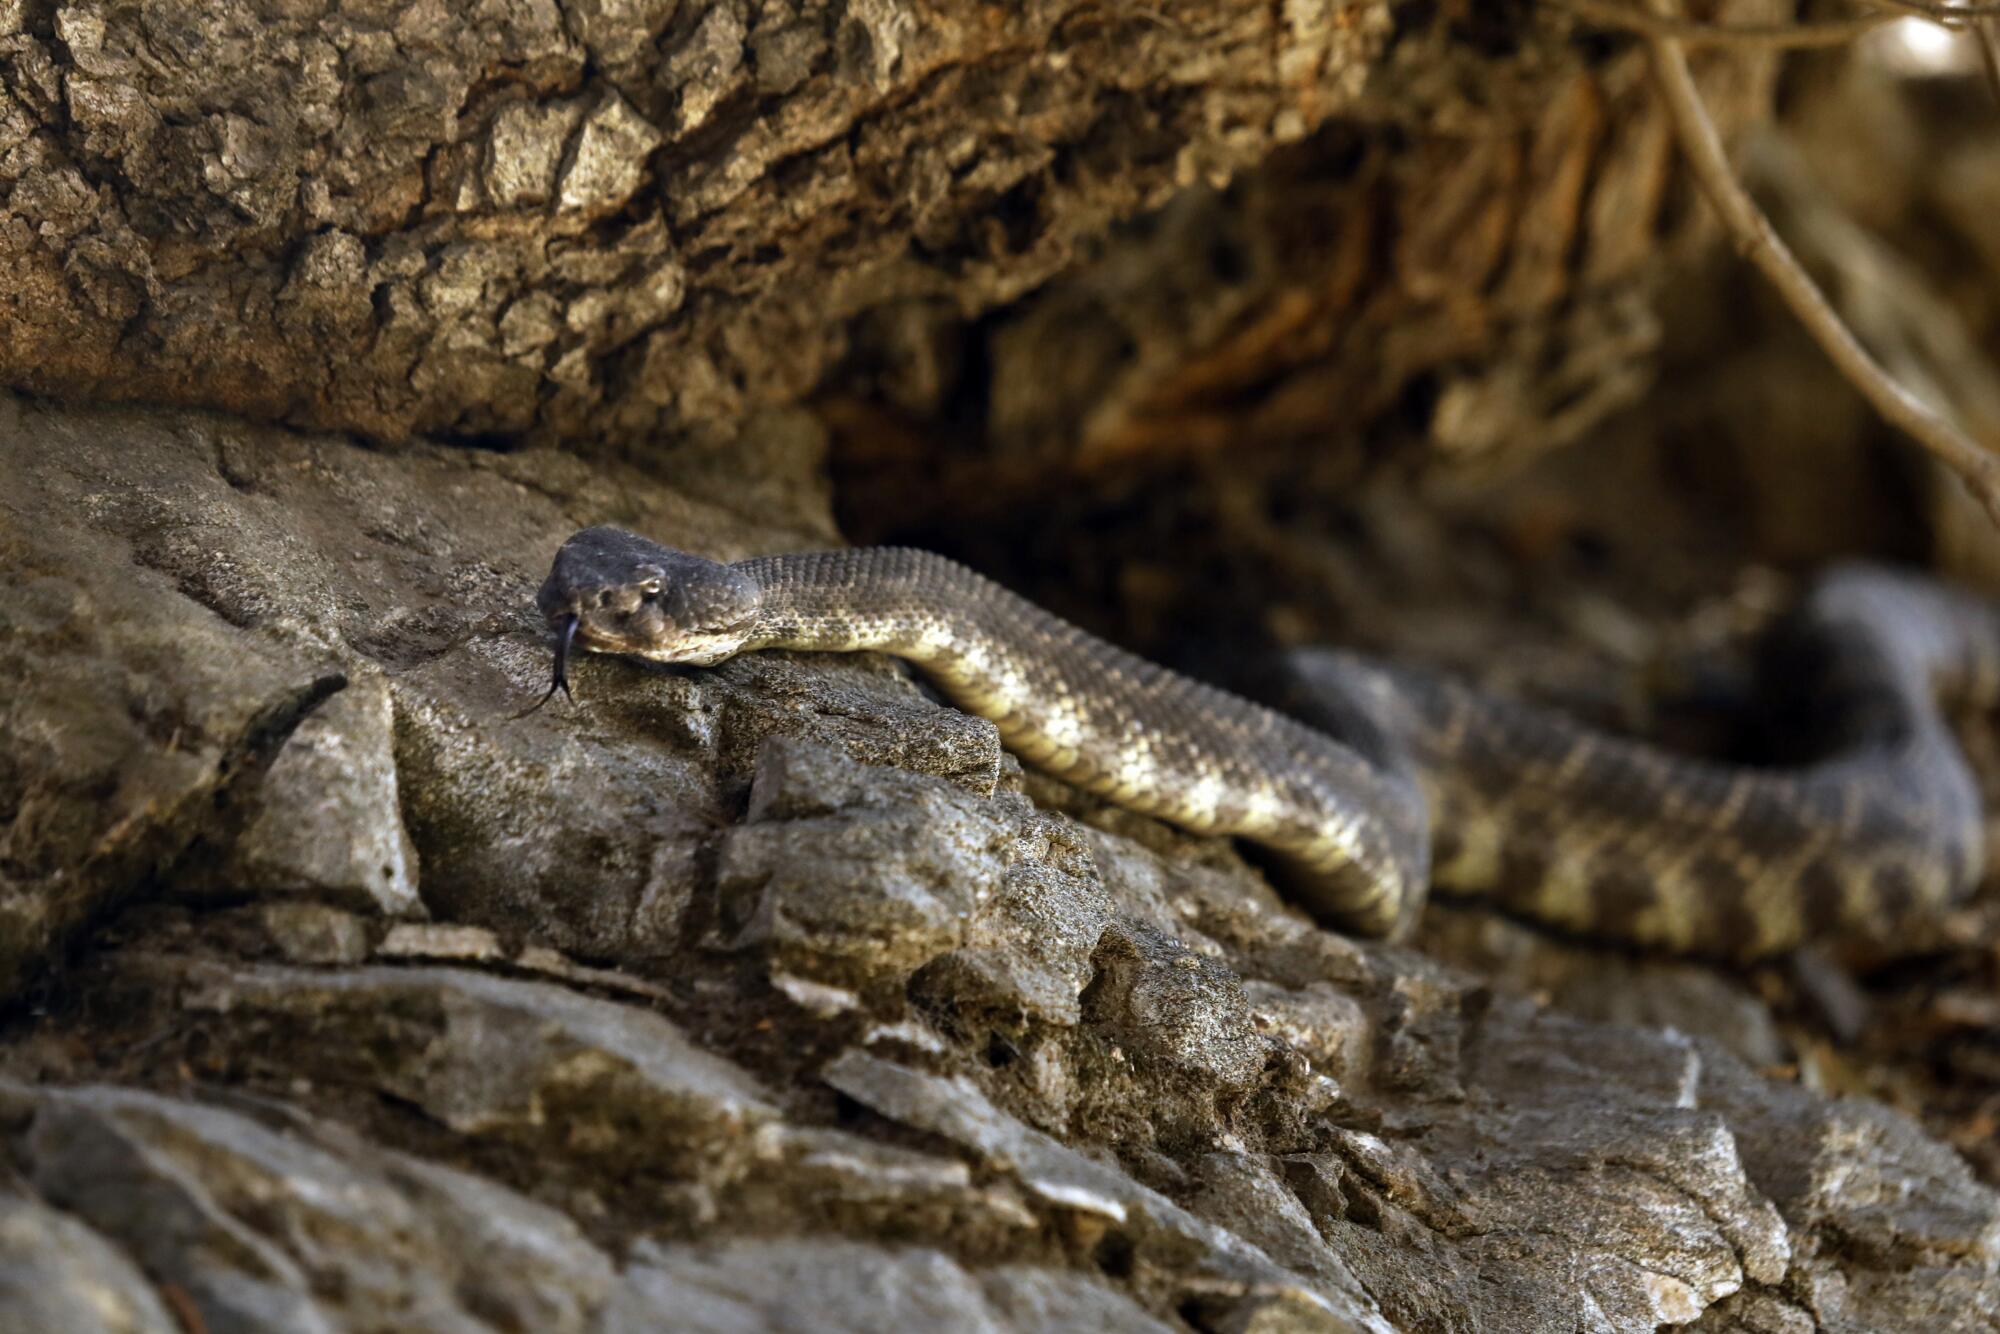 A Pacific rattlesnake on rocks along the West Fork of the San Gabriel River